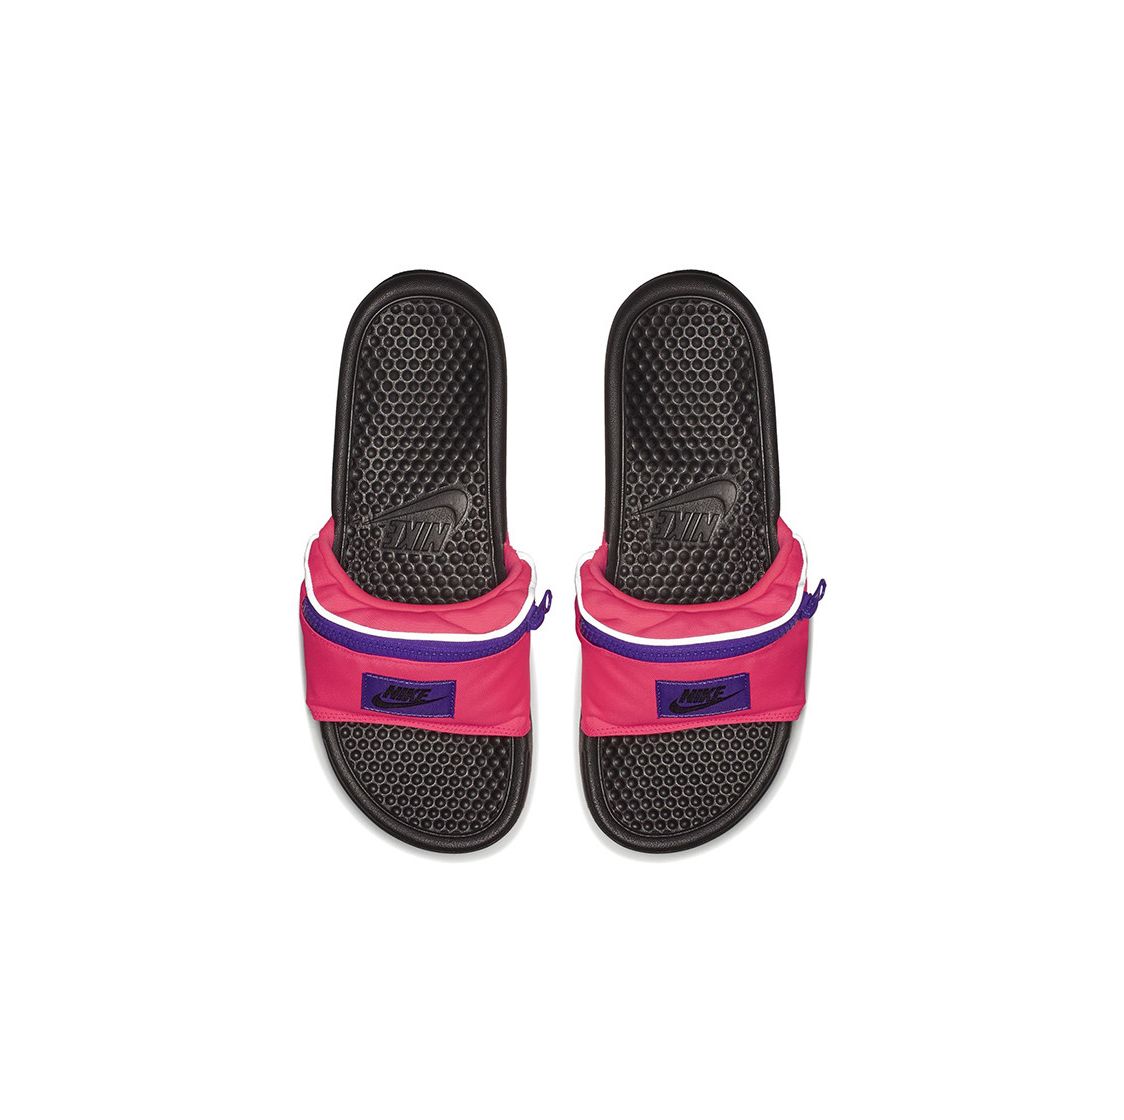 The Slip It In | Shinesty USA Fanny Pack Slides